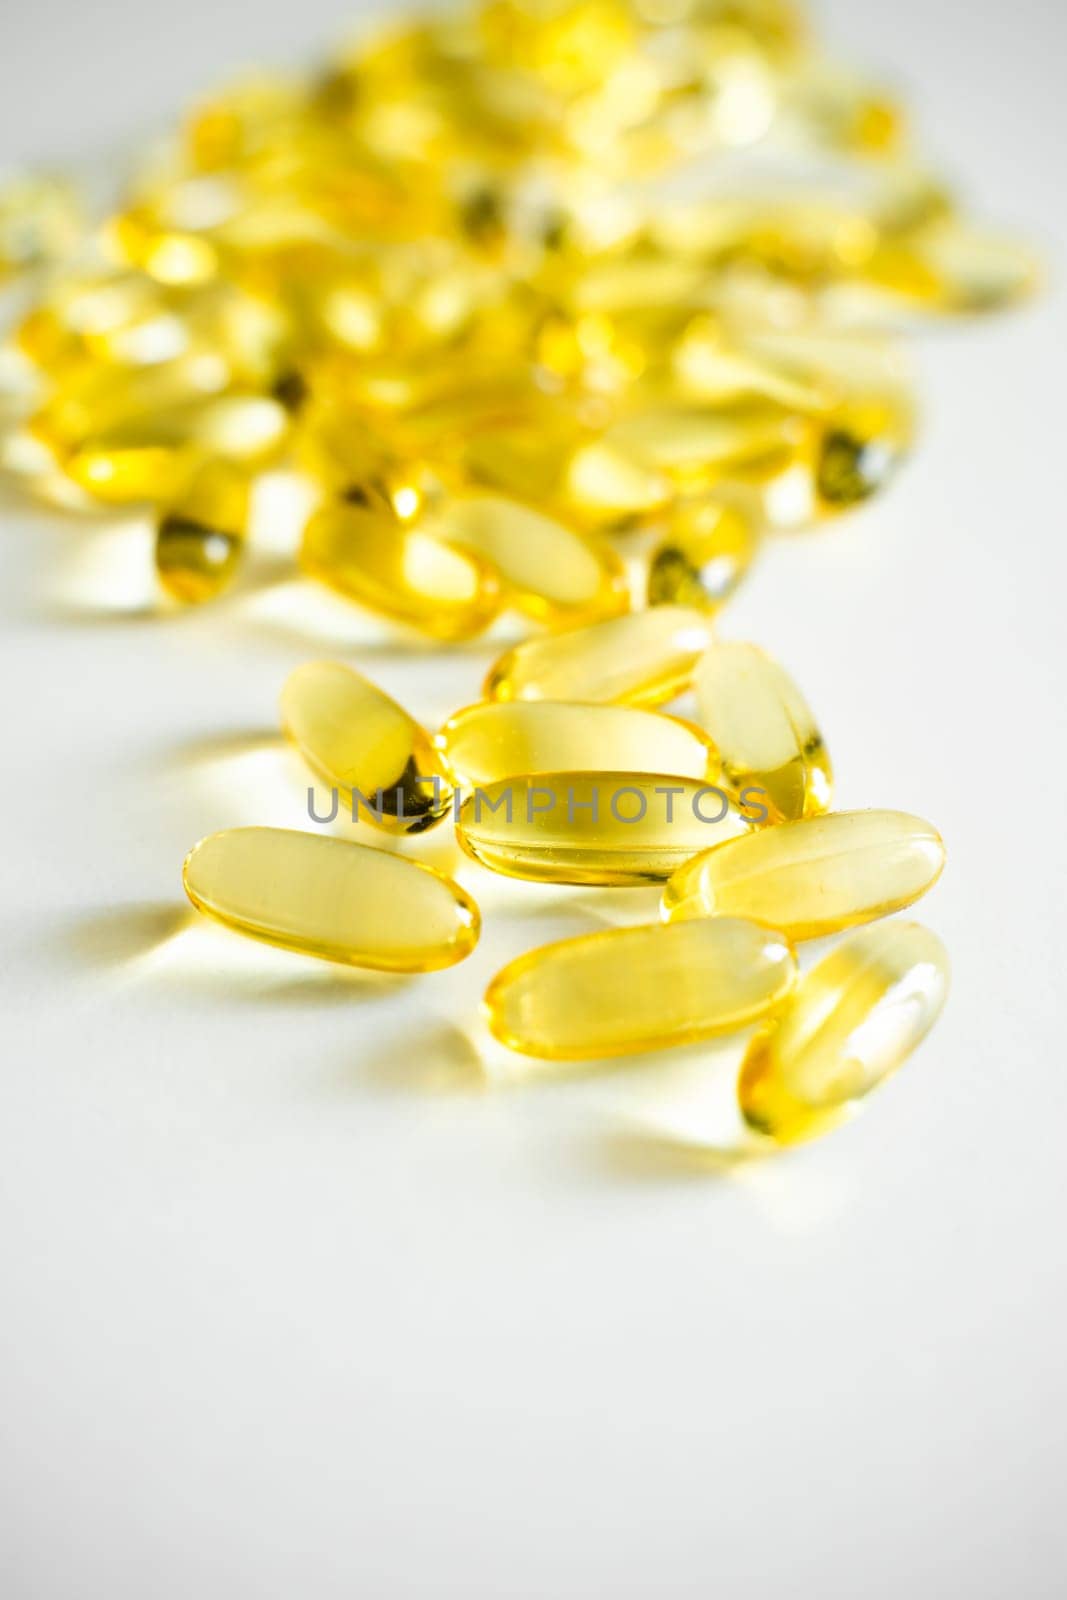 Fish oil supplement capsules on a white surface as a background. Oil filled capsules of food supplements. Fish oil, omega 3. by vovsht